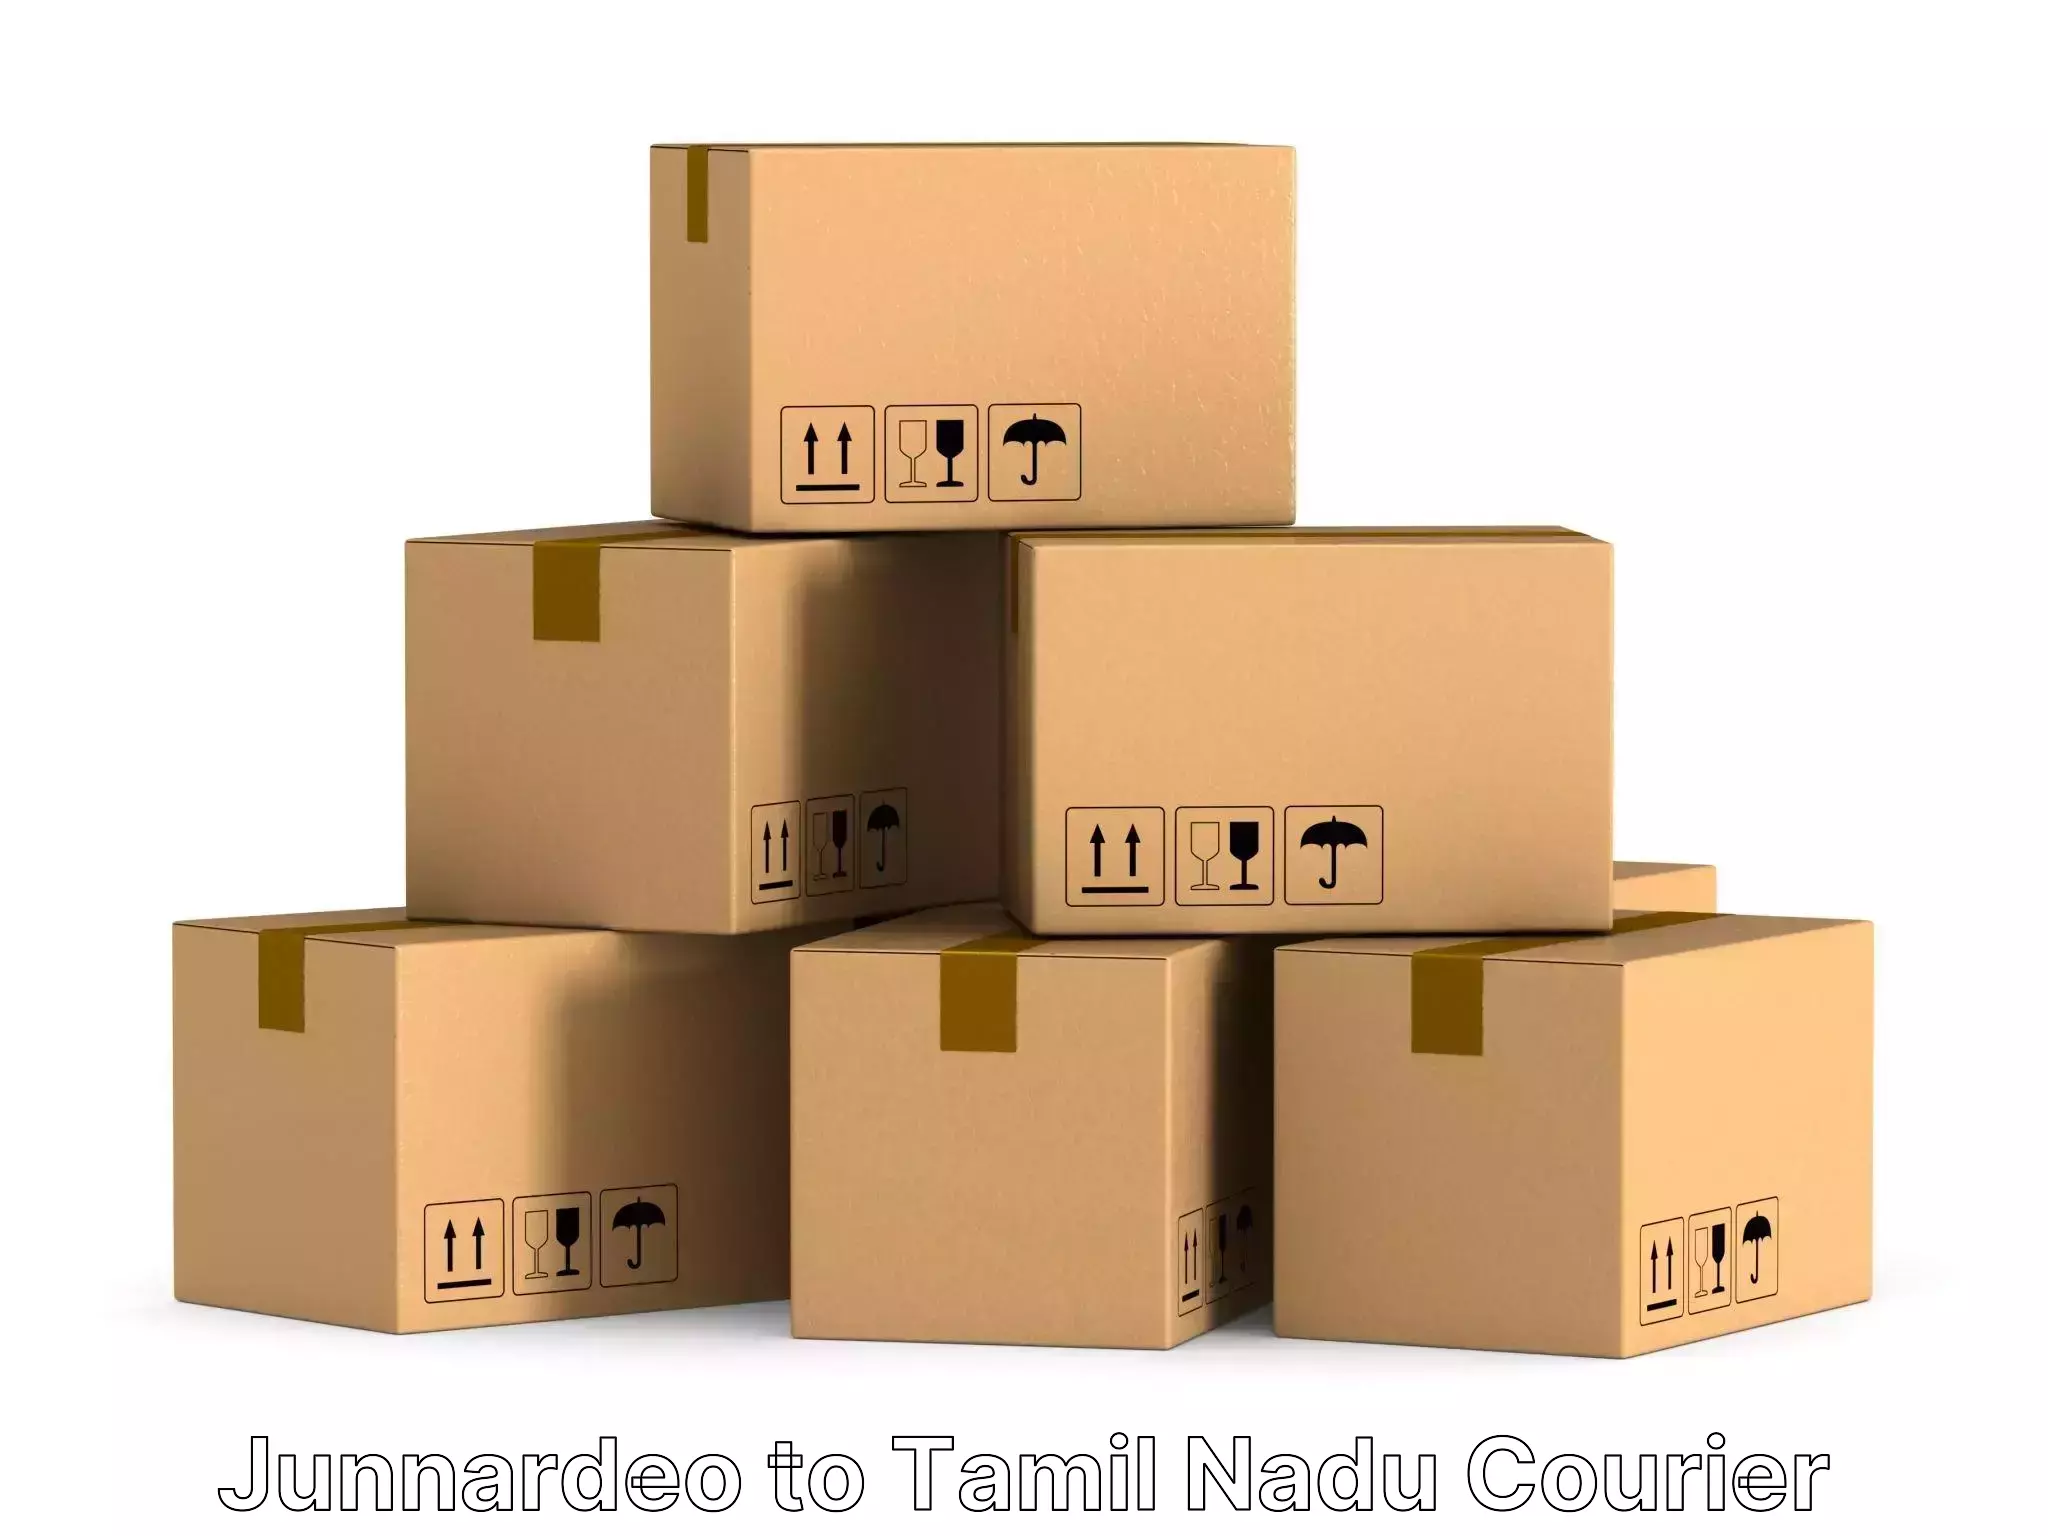 Personalized moving plans Junnardeo to Ennore Port Chennai